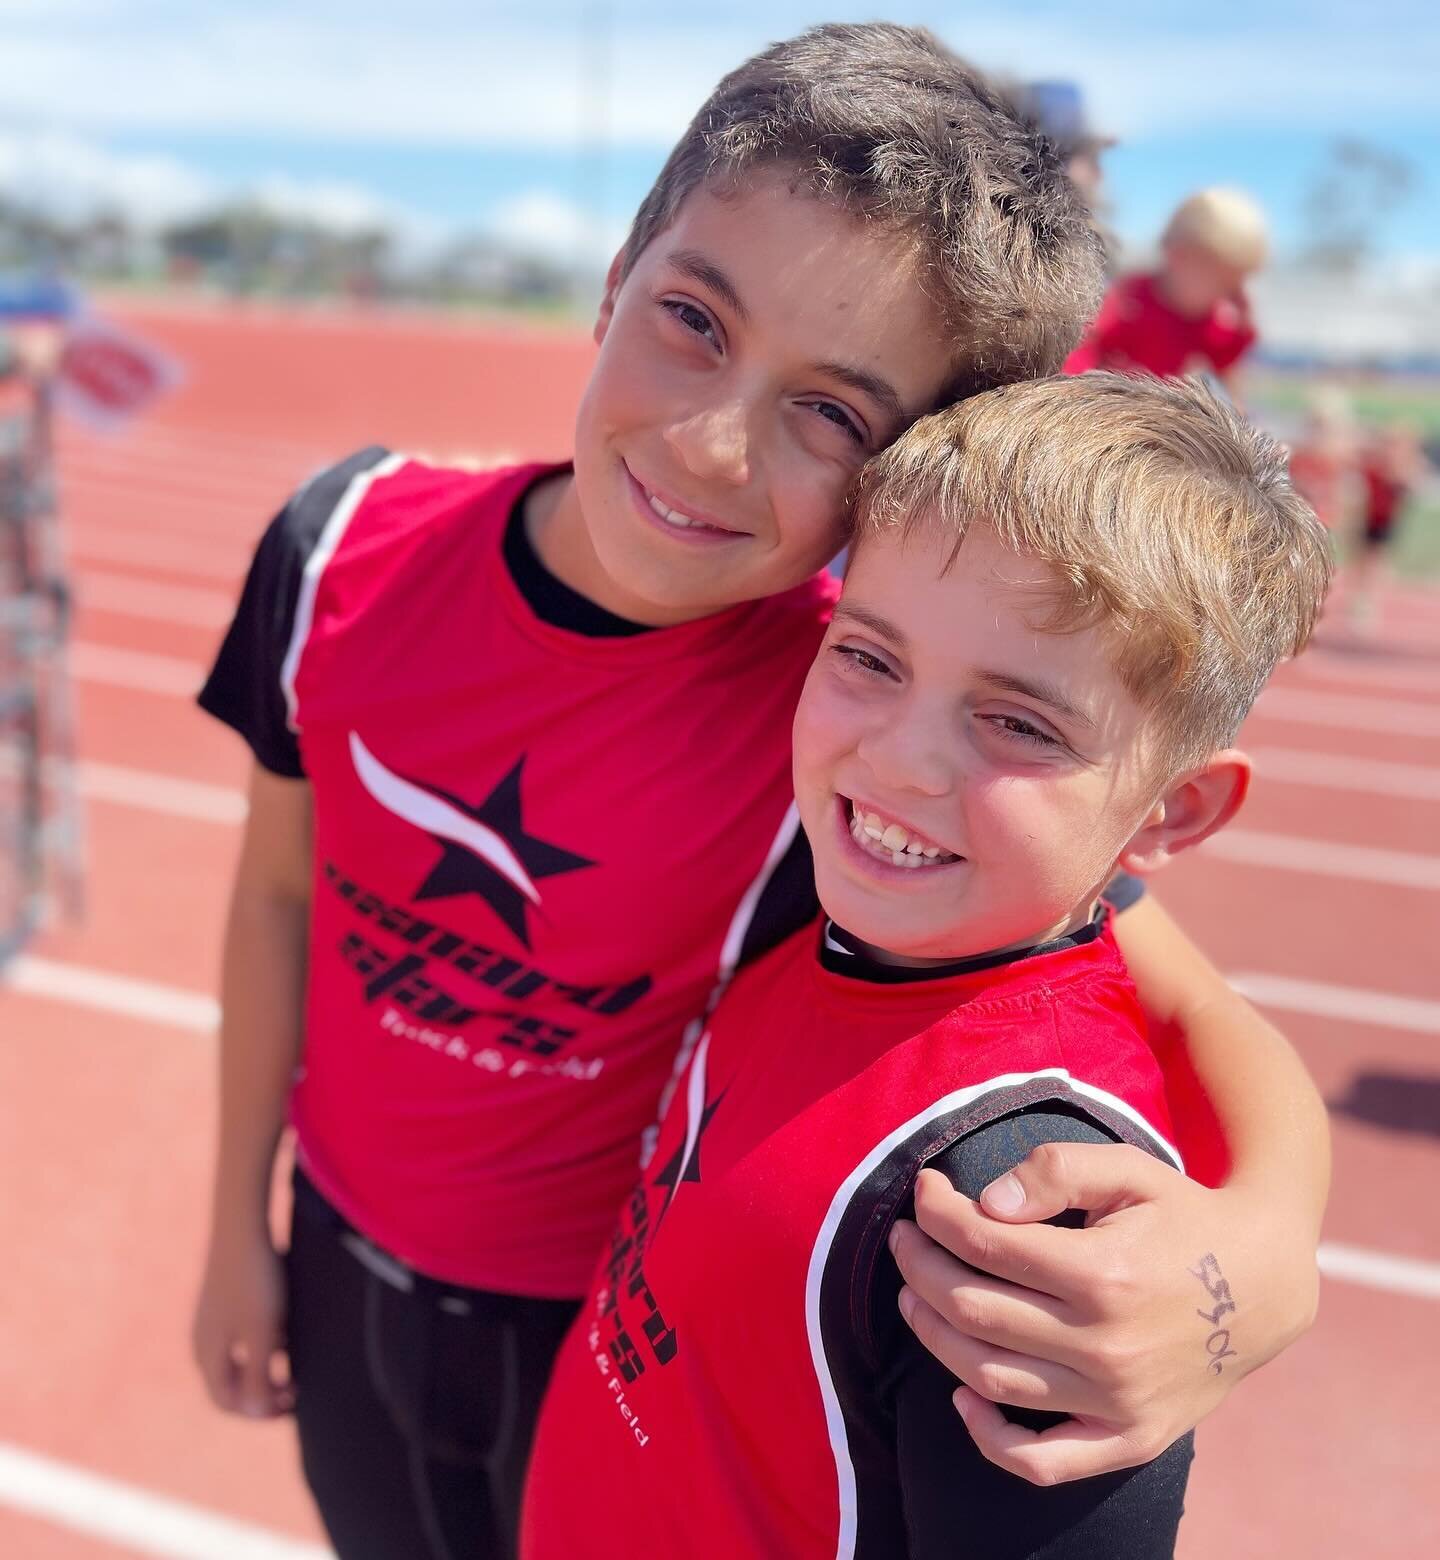 My little runners 🏃🏻🏃
Track season is officially here to take over my Saturdays for the next few months but my ni&ntilde;os are motivated to run and I&rsquo;m so proud to see them give it their best! 💕❤️ 

#myni&ntilde;os #boymom #oxnardstars #be